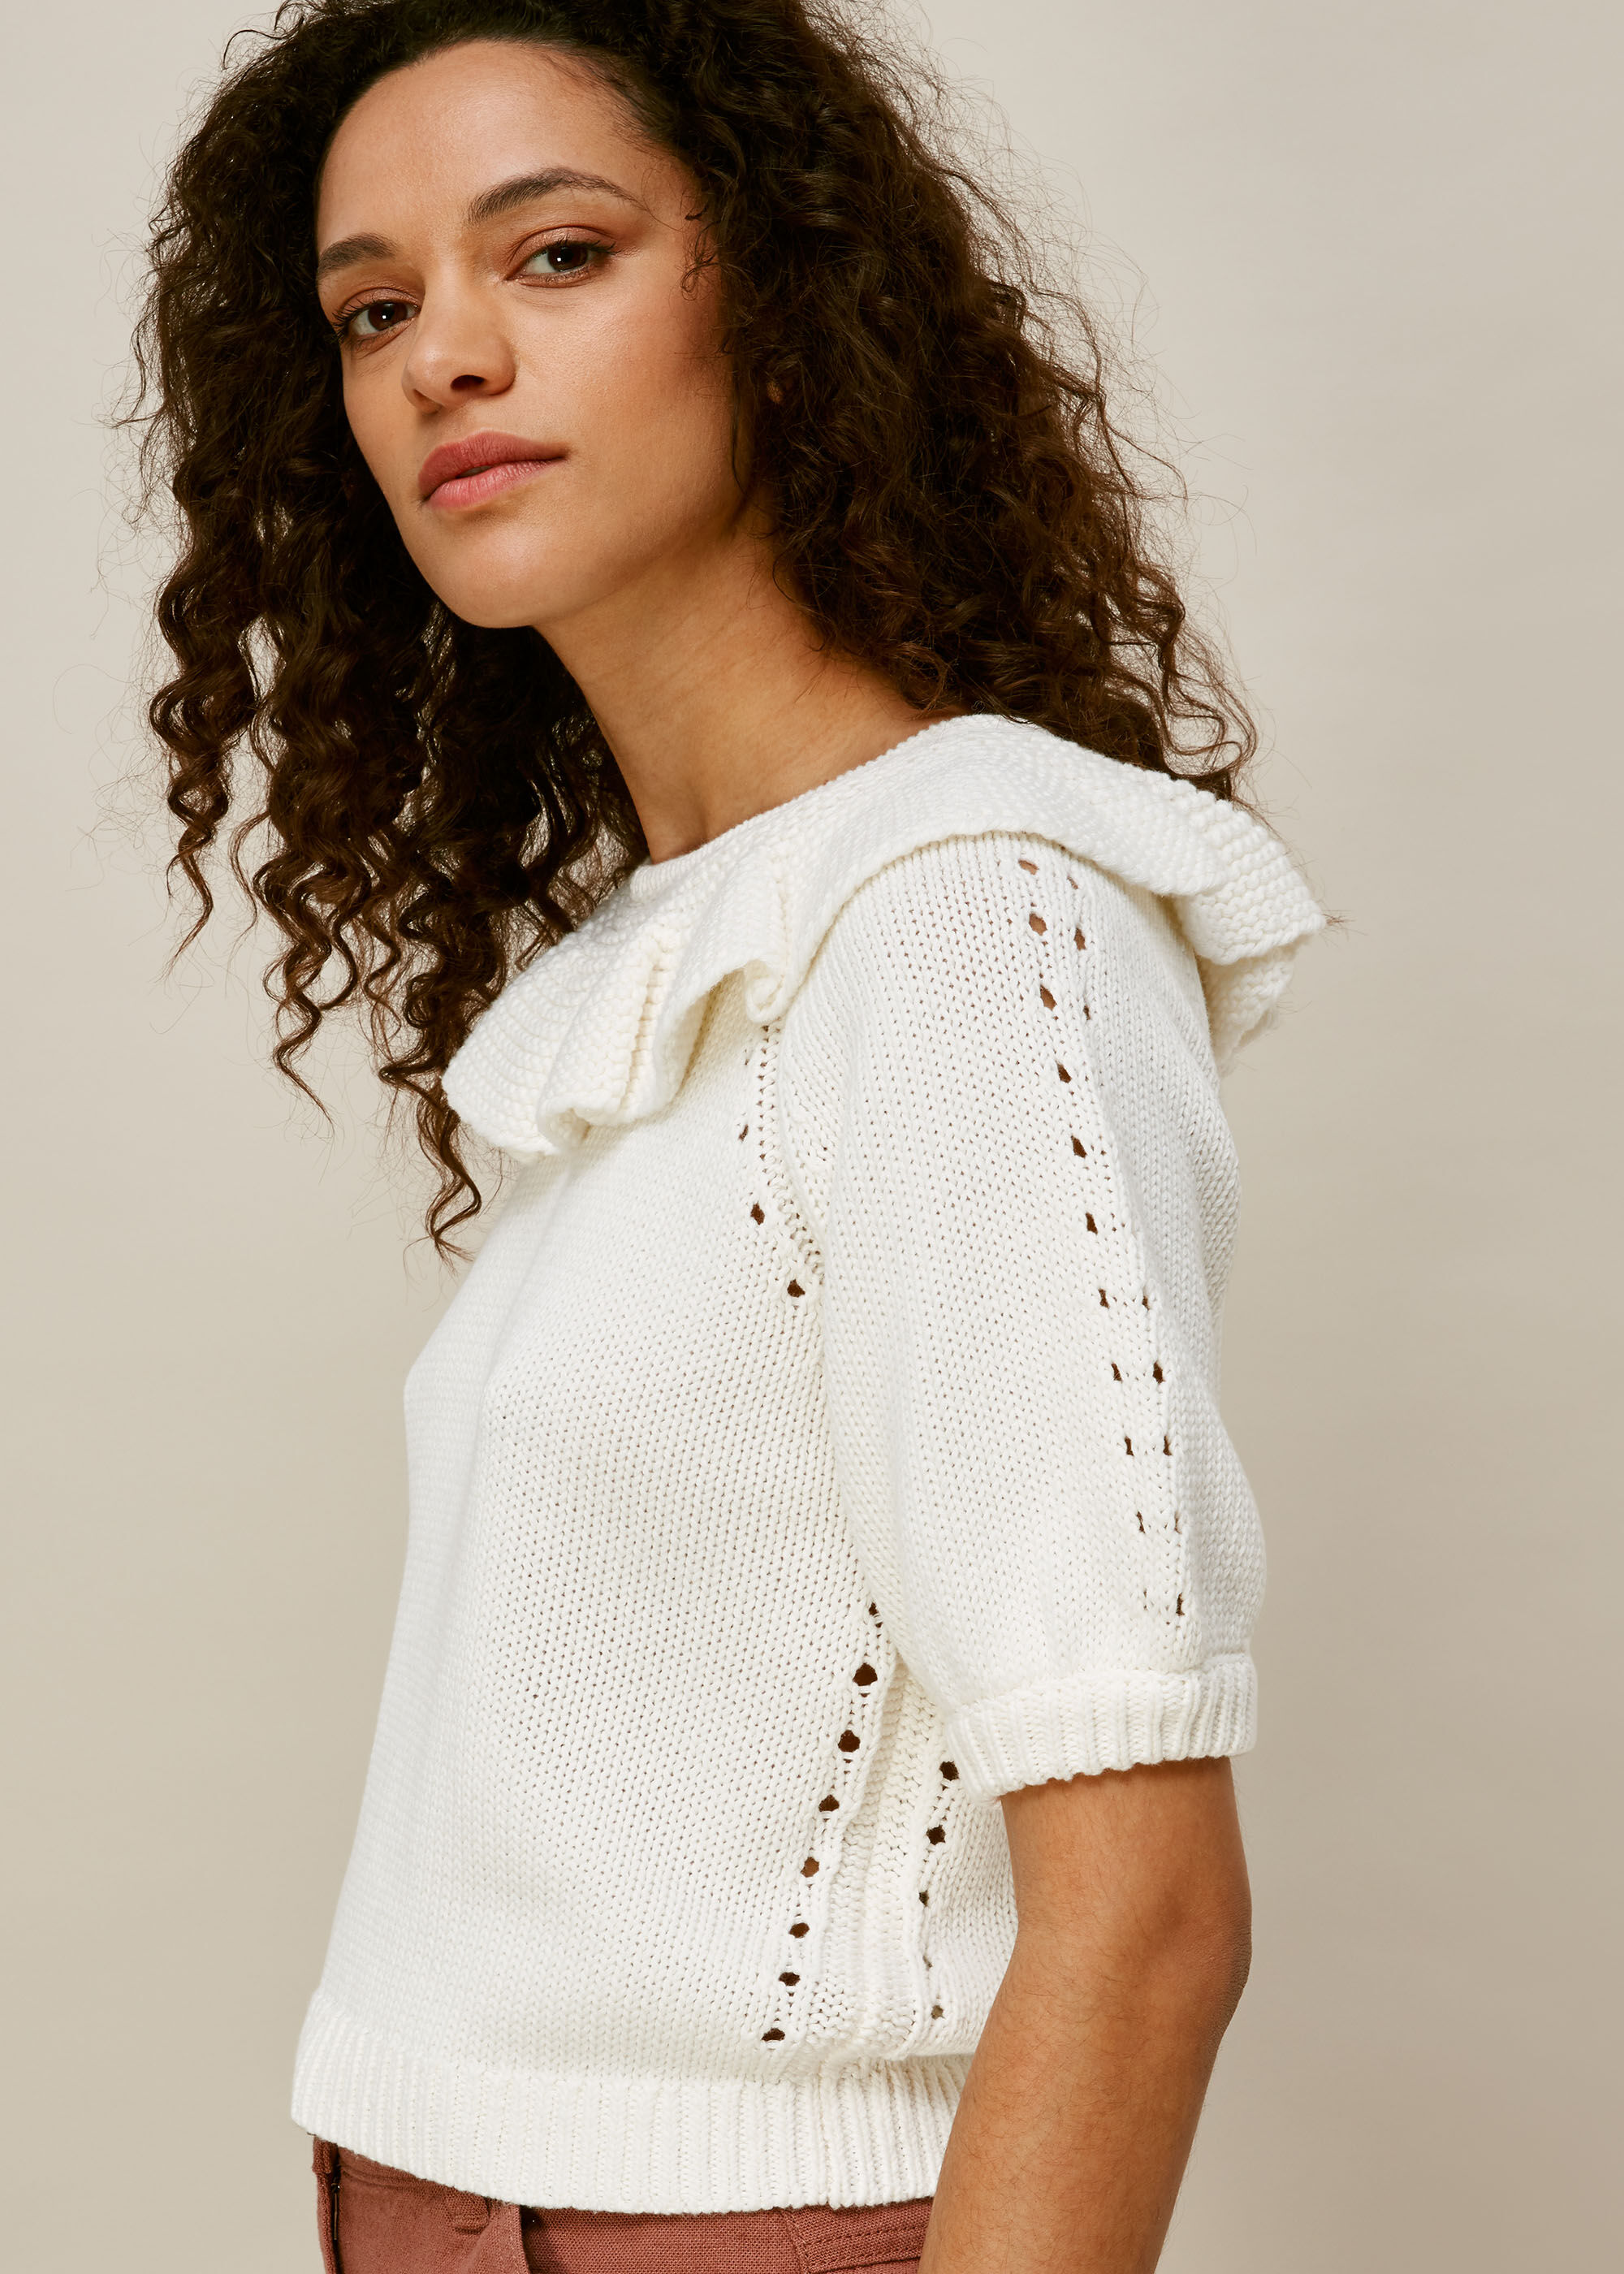 White Frill Neck Knit Sweater | WHISTLES |